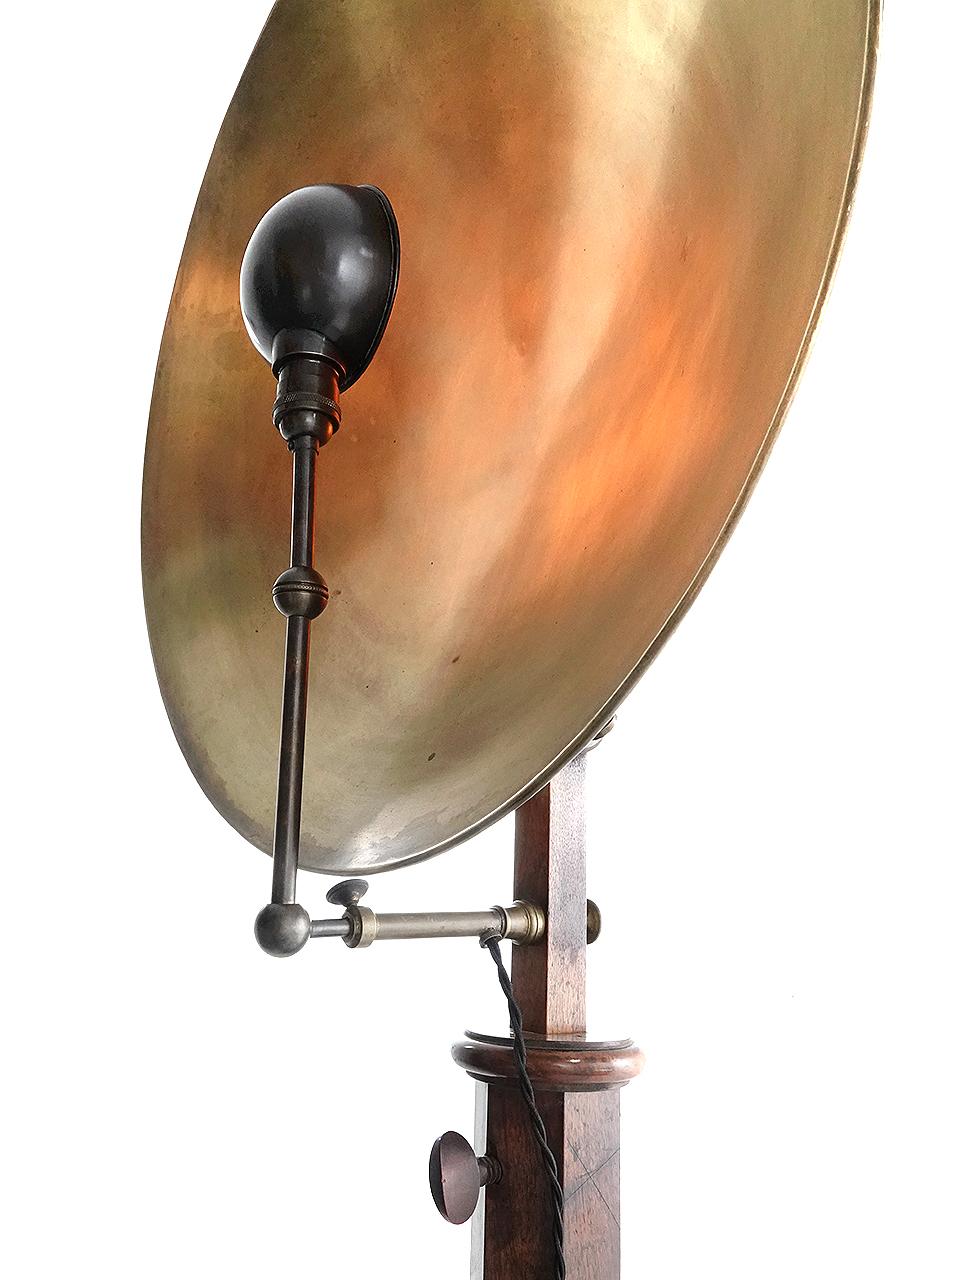 This is a extremely rare and early 19th century experimental device. This example is set up as a simple large reflective and dramatic floor lamp. Originally it was used for research of physical experiences that would focus light, heat and sound. The